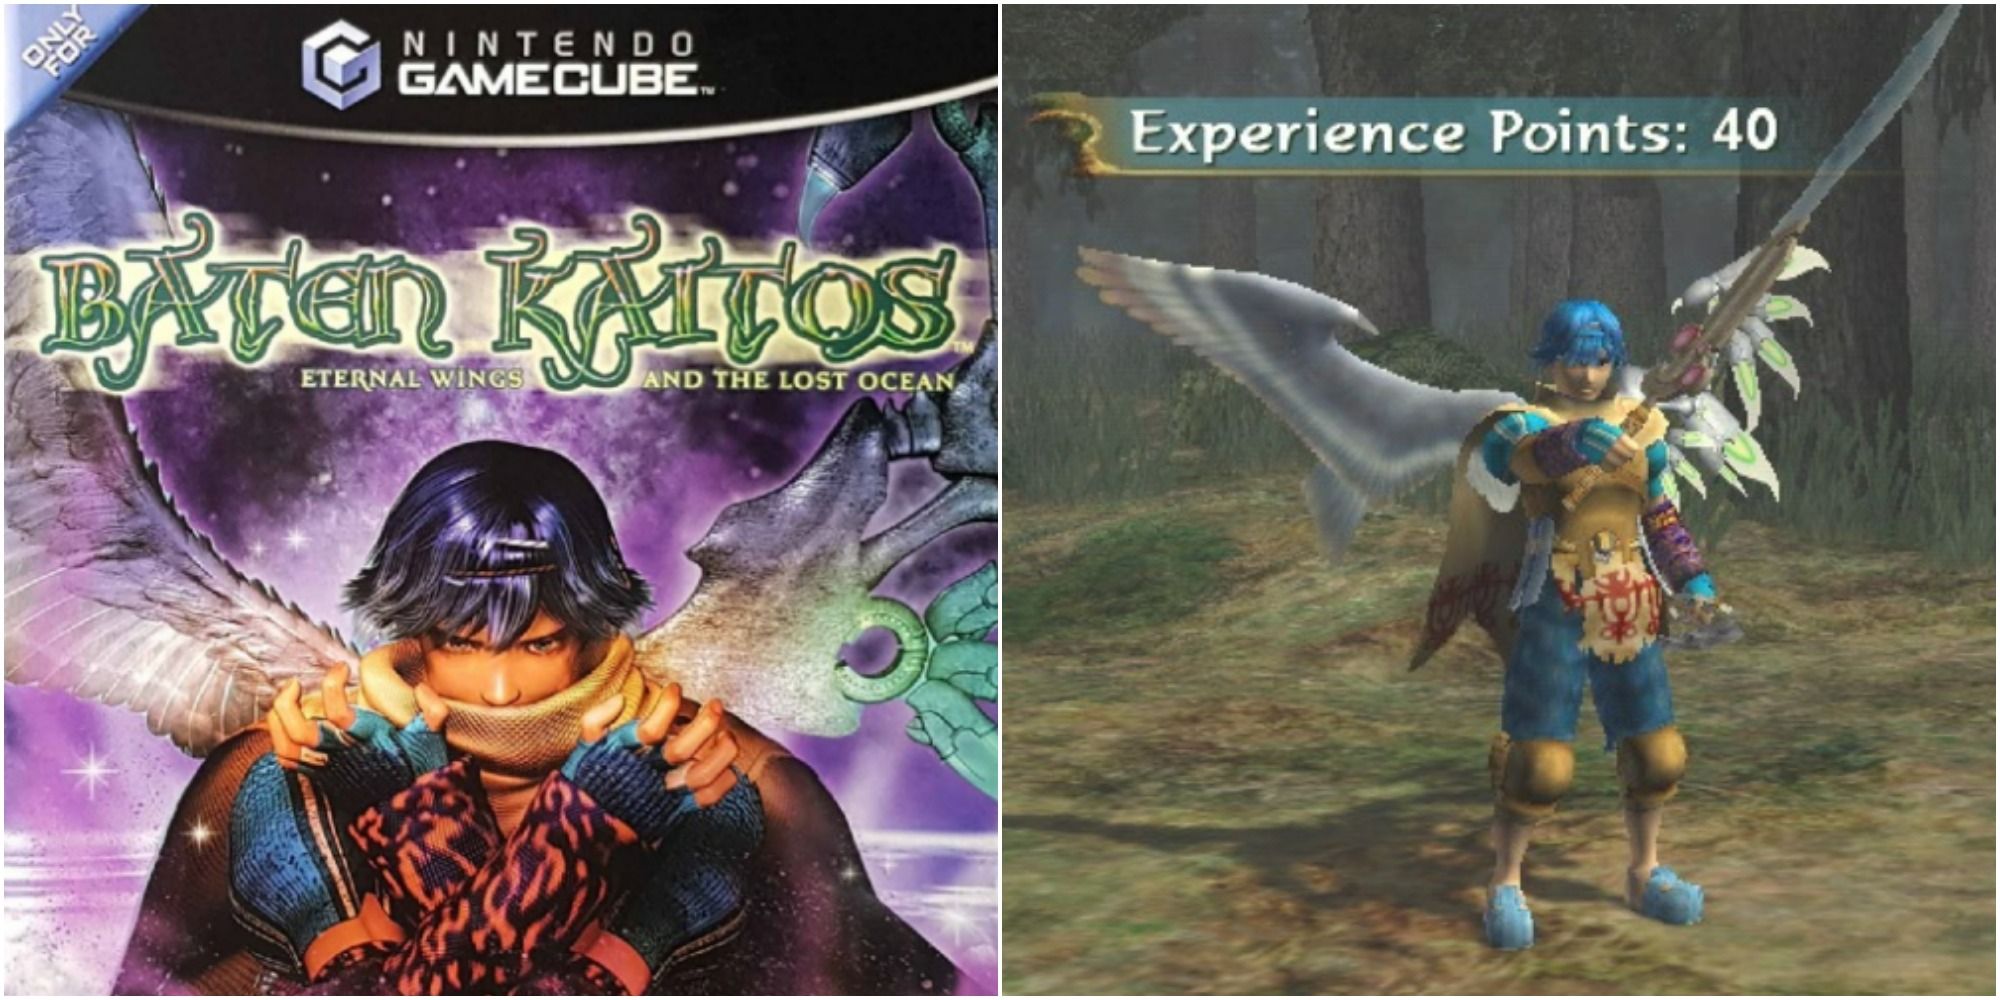 baten kaitos gamecube cover art with kalas protagonist and gameplay featuring Kalas gaining experience points featured